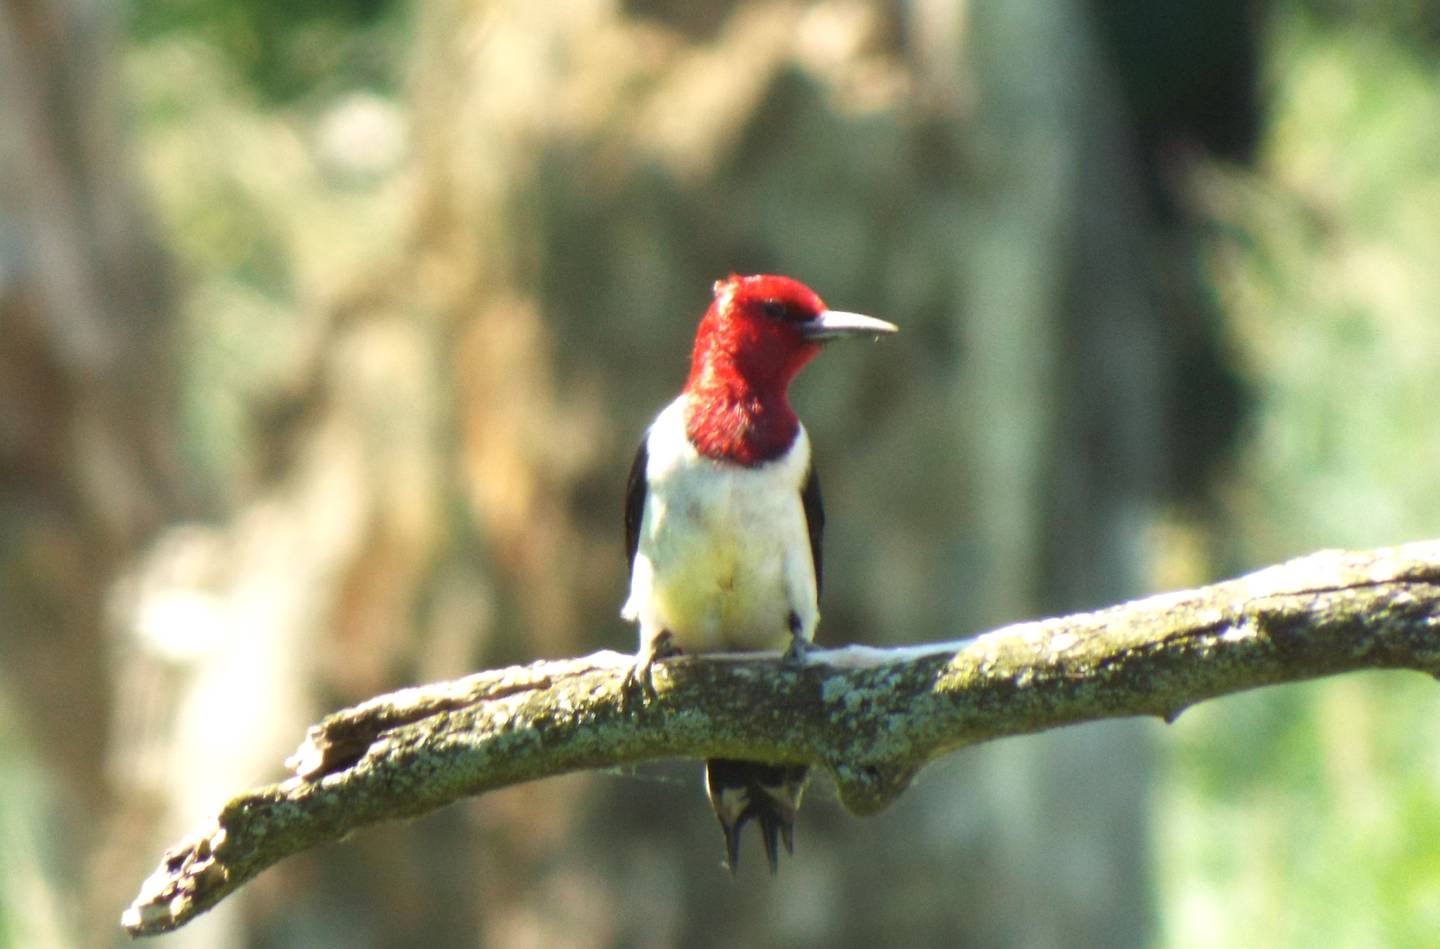 The American Bird Conservancy is the lead partner of the program because they identified oak trees to be crucial to the vulnerable red-headed woodpecker populations.